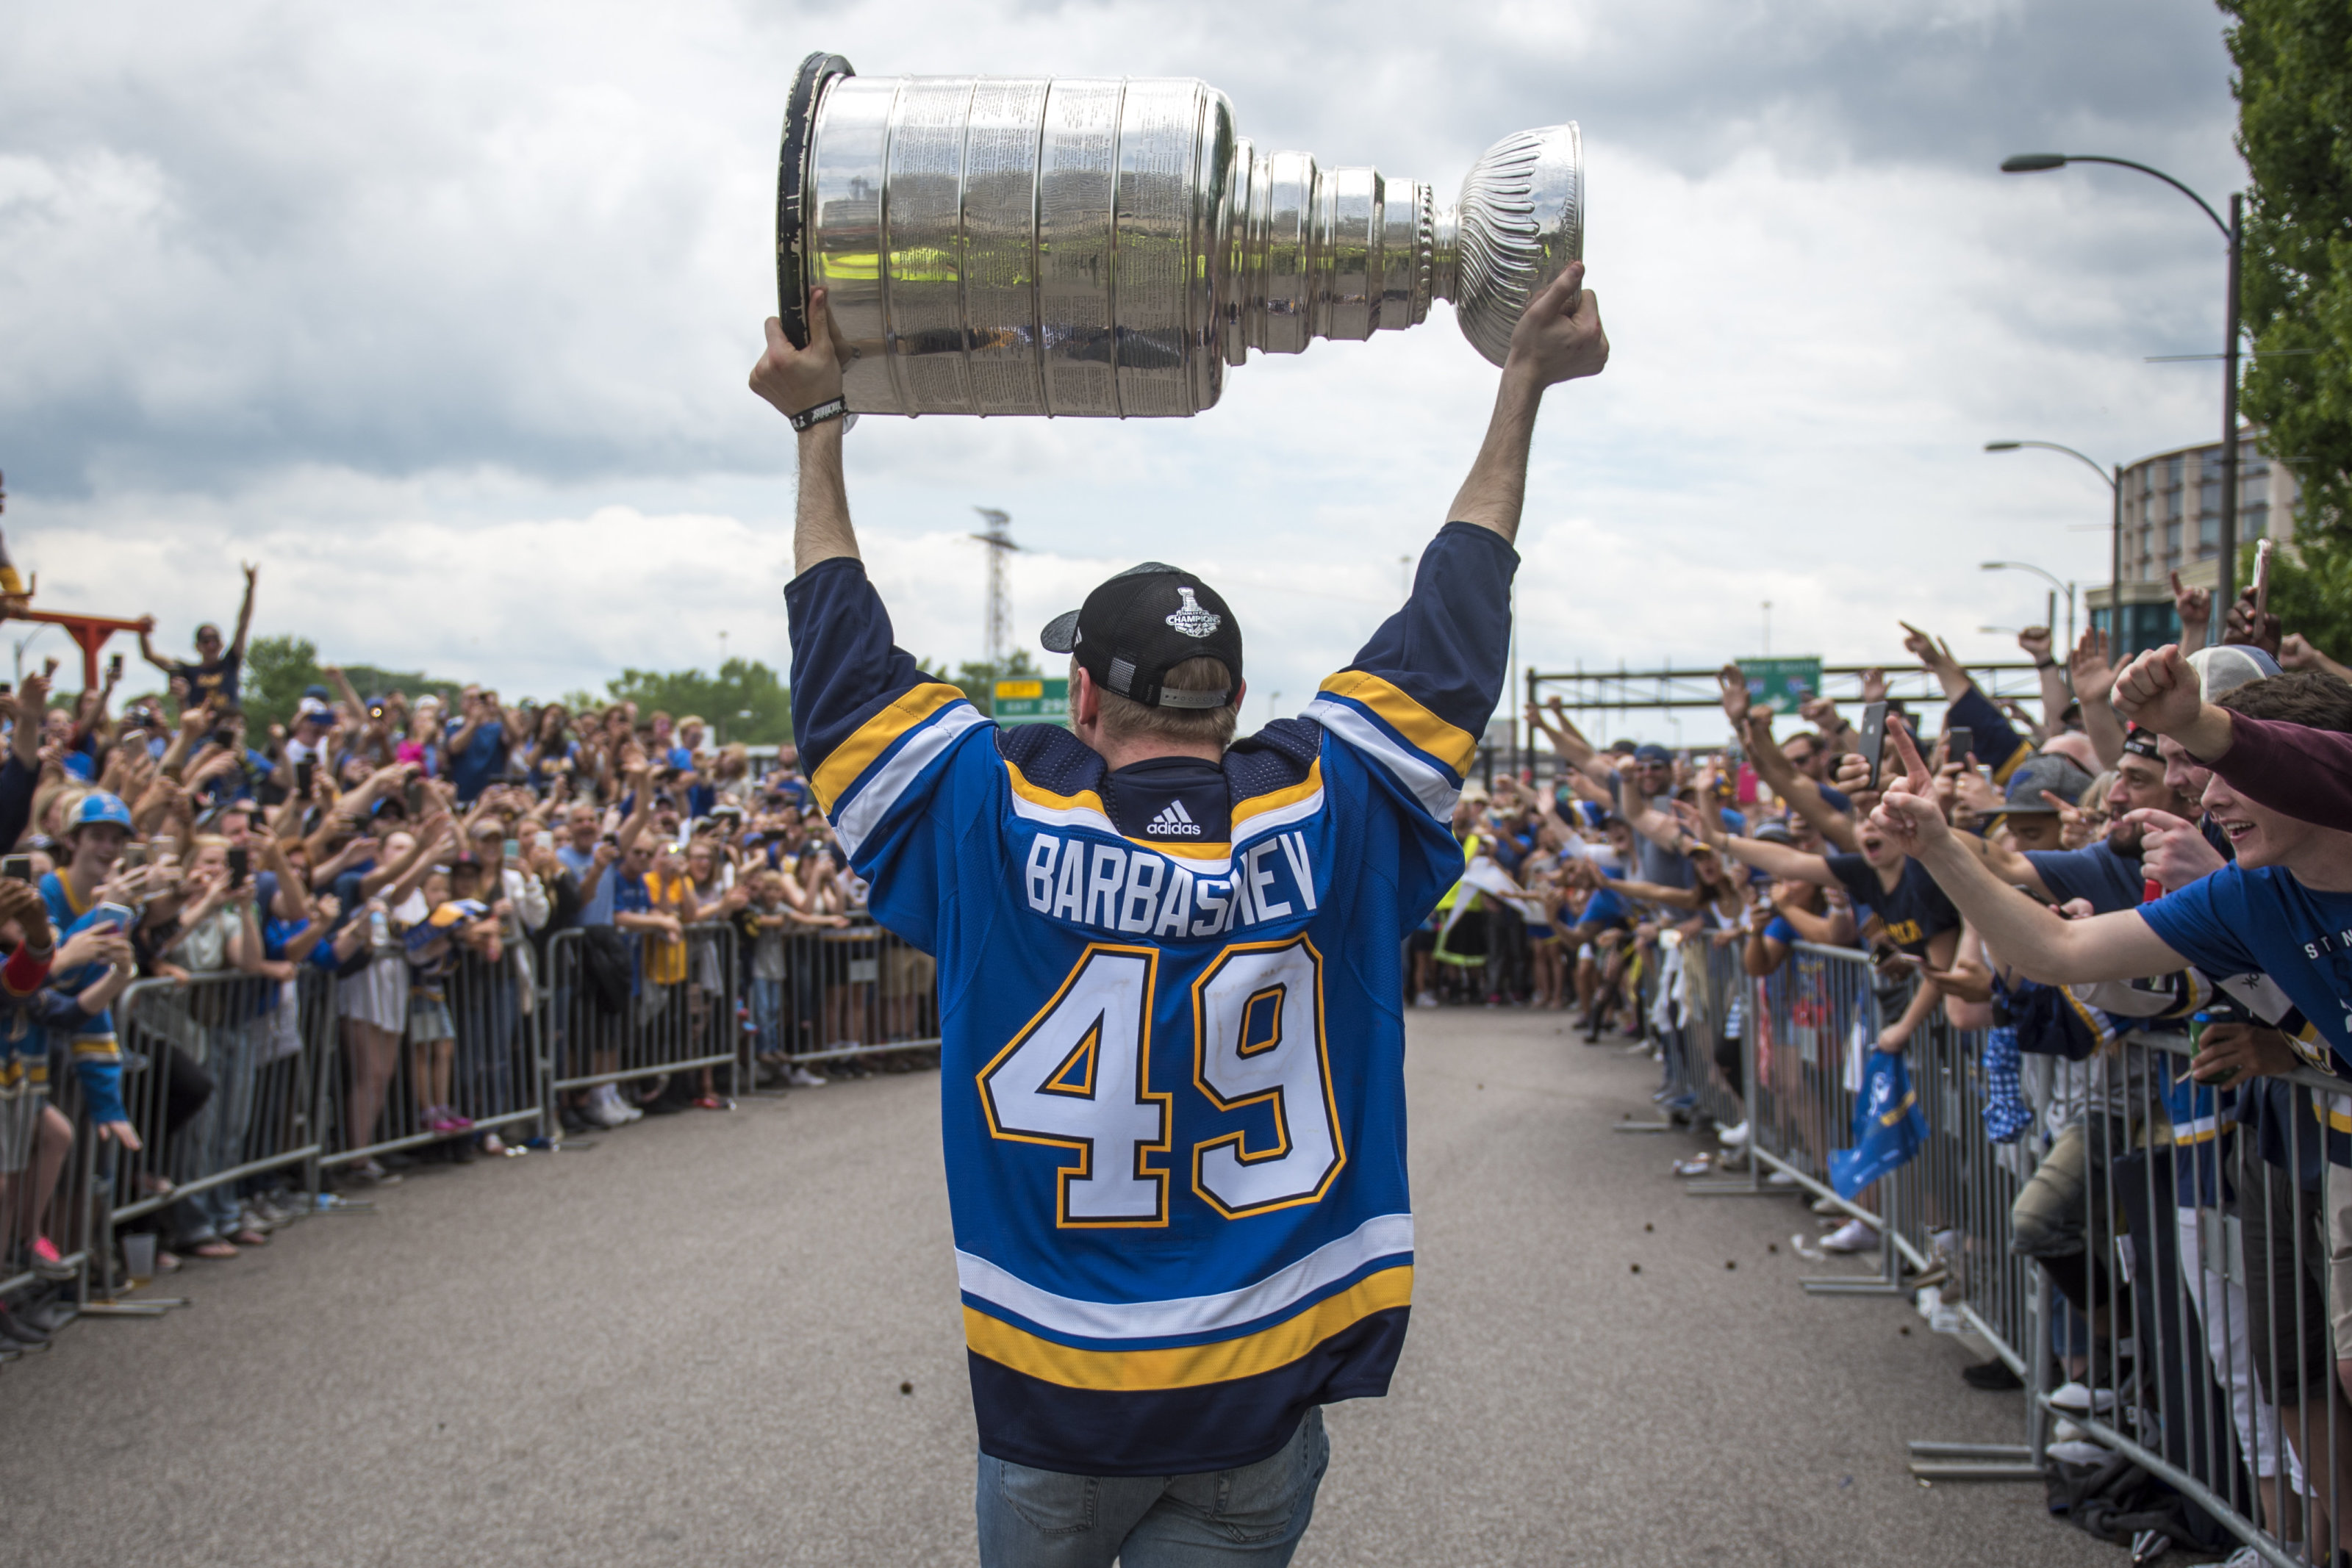 How to watch and stream St. Louis Blues: 2019 Stanley Cup